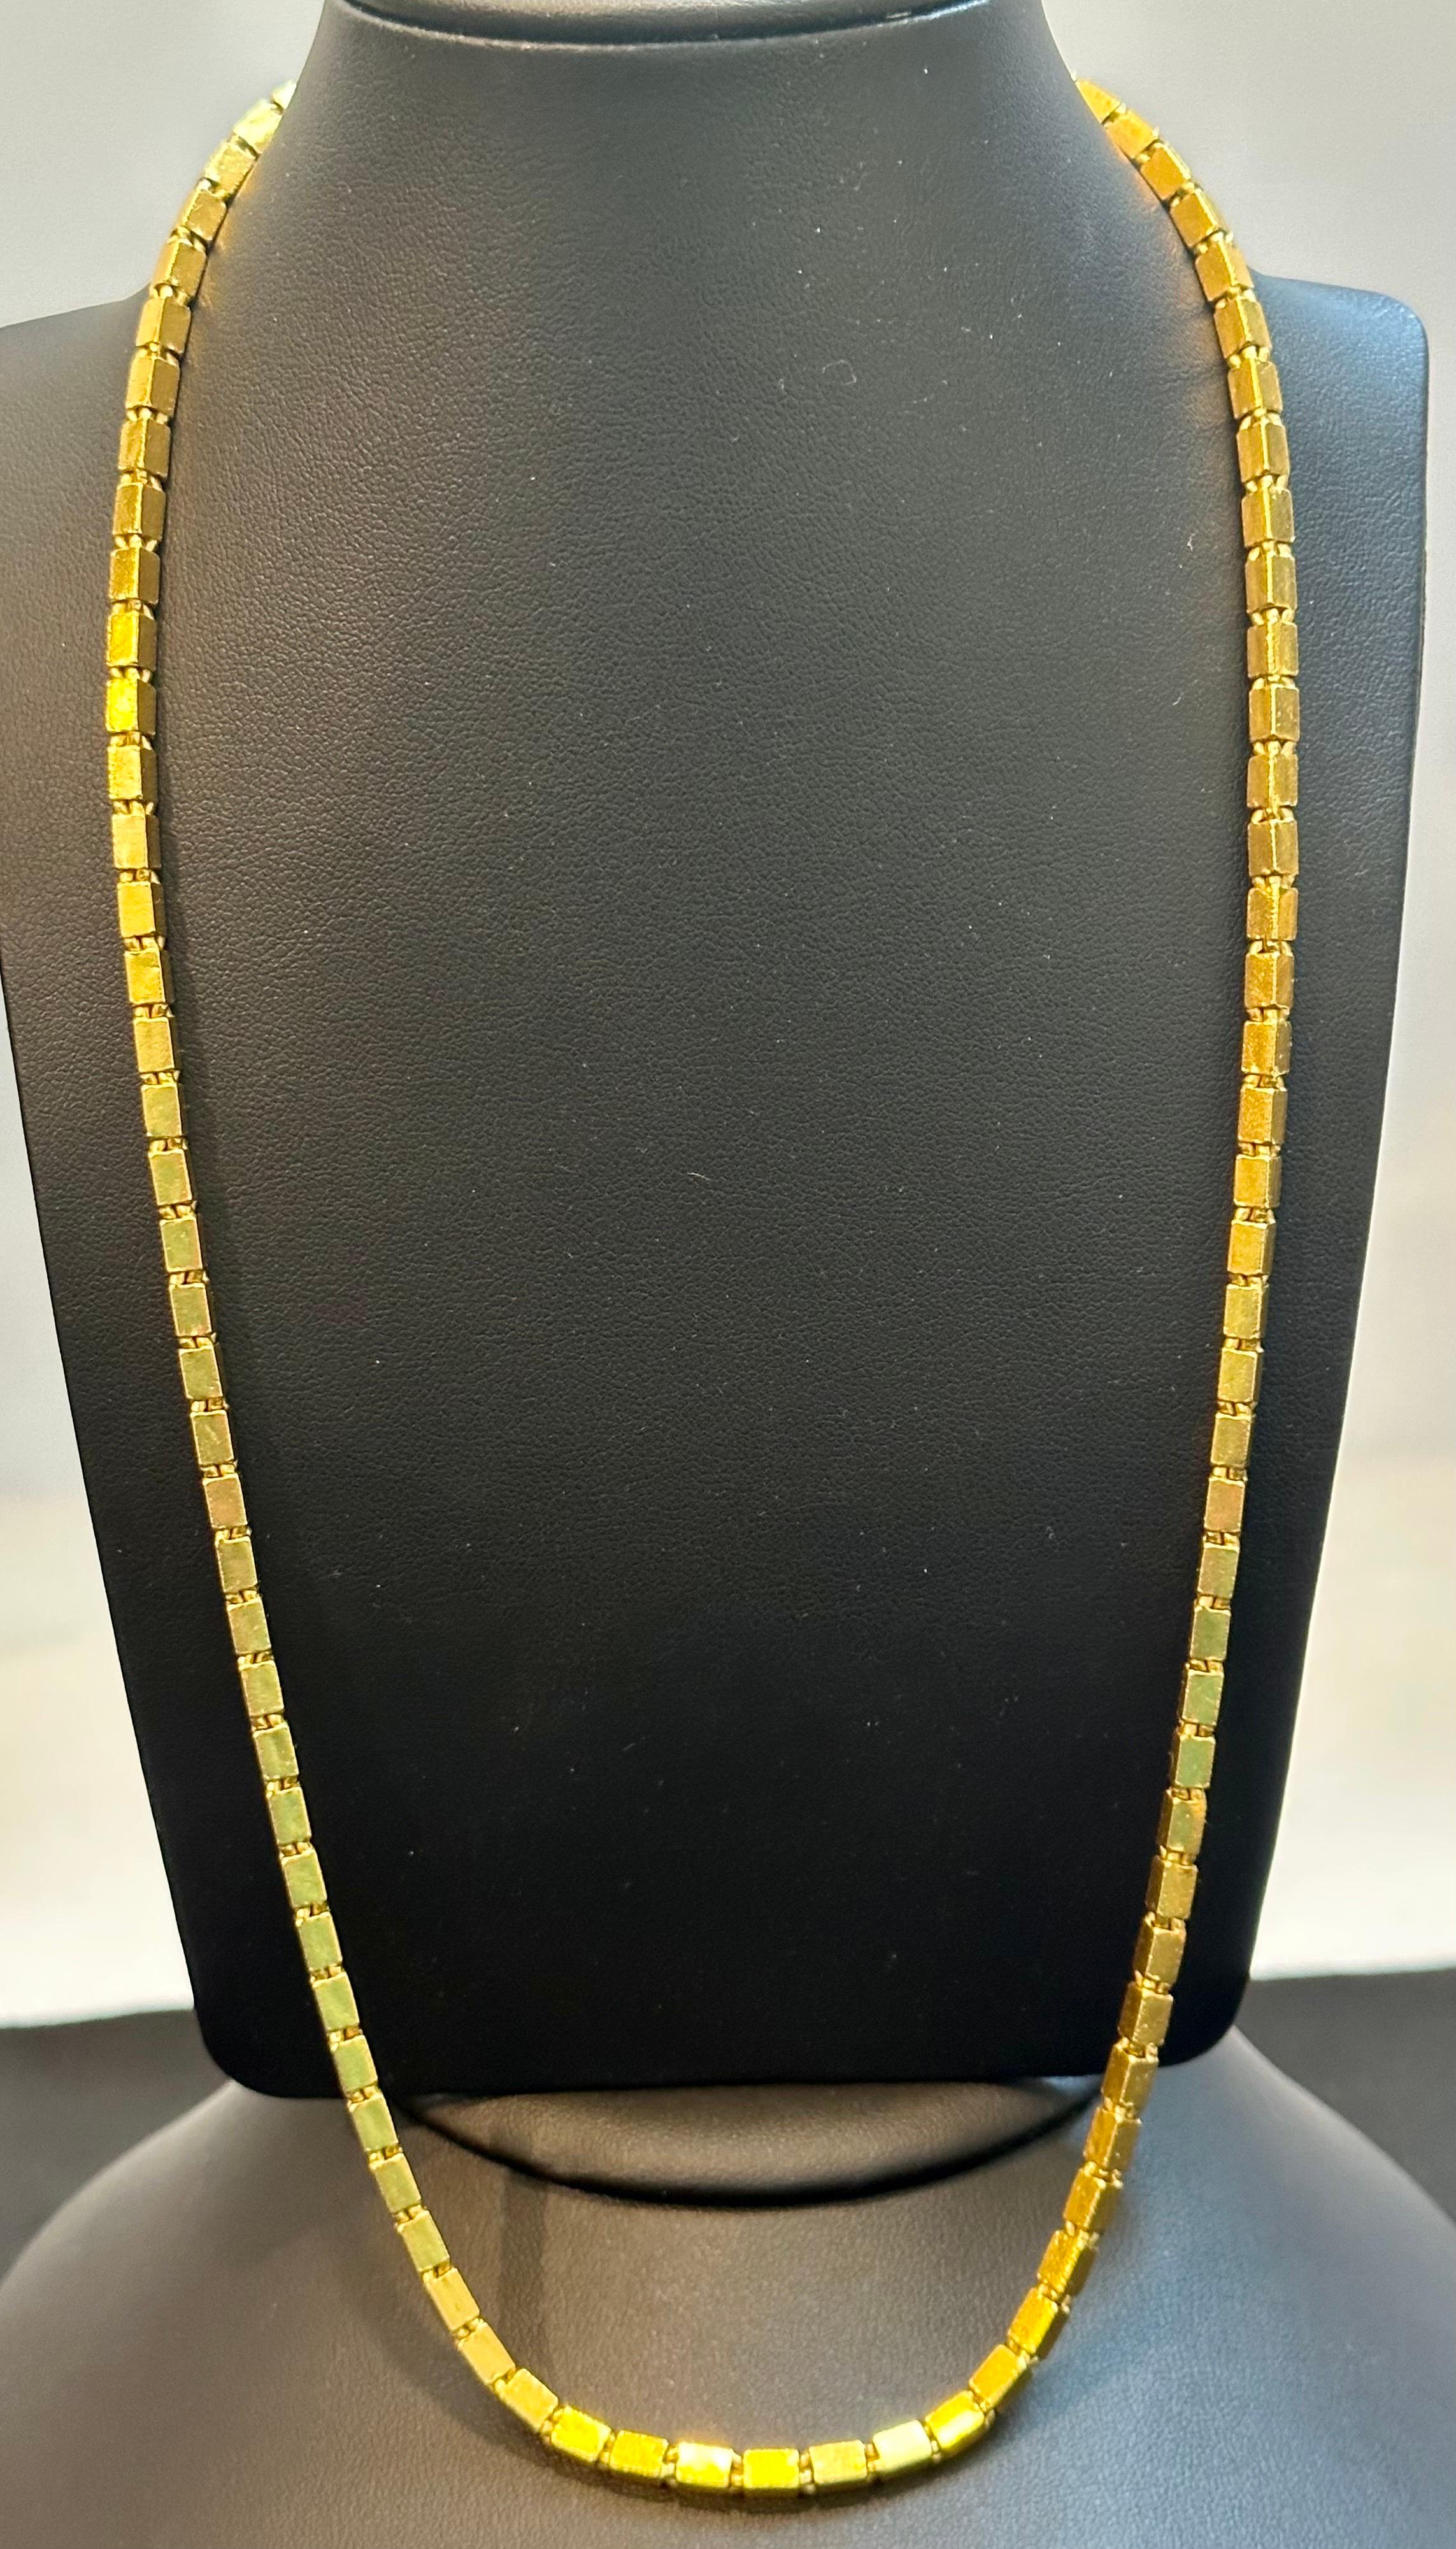 Vintage 60.6 gm Pure 24 Kt Yellow Gold Hand Made Chain , 22 inch long
 pure gold
3.6 mm wide 
Hand Made in Thailand
almost 2 OZ of pure gold 
Chain is 22 inch long so t can fit over the head and you need not to open the clasp everytime.
Simple block